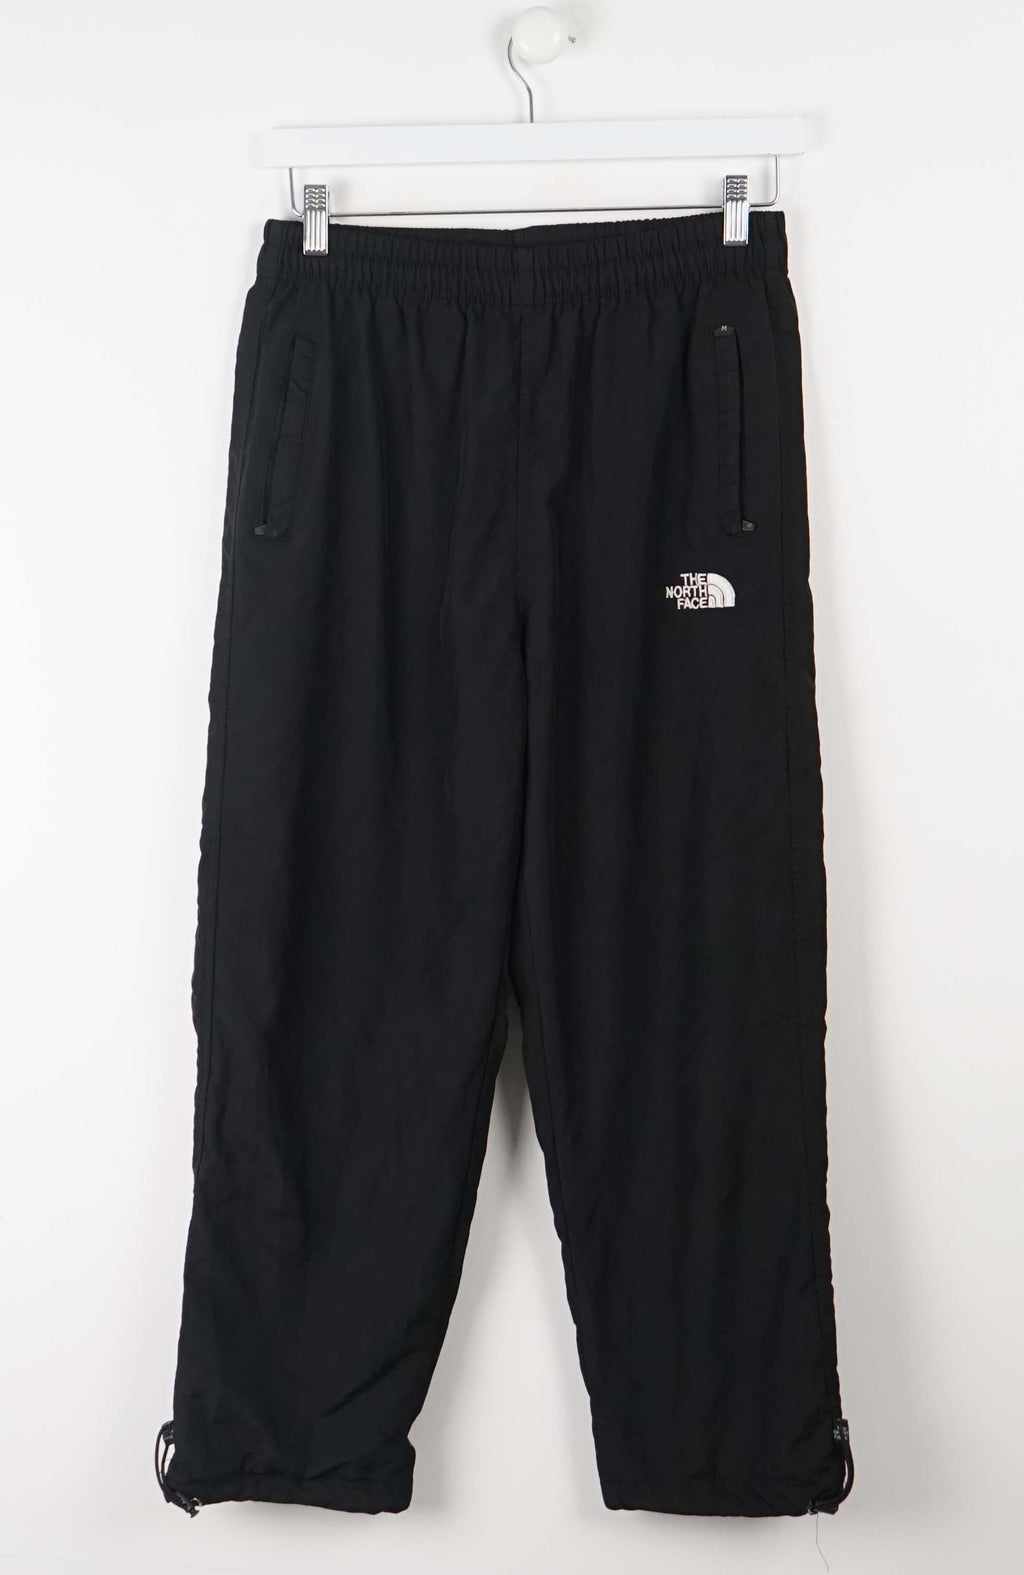 VINTAGE THE NORTH FACE TRACK PANTS W28